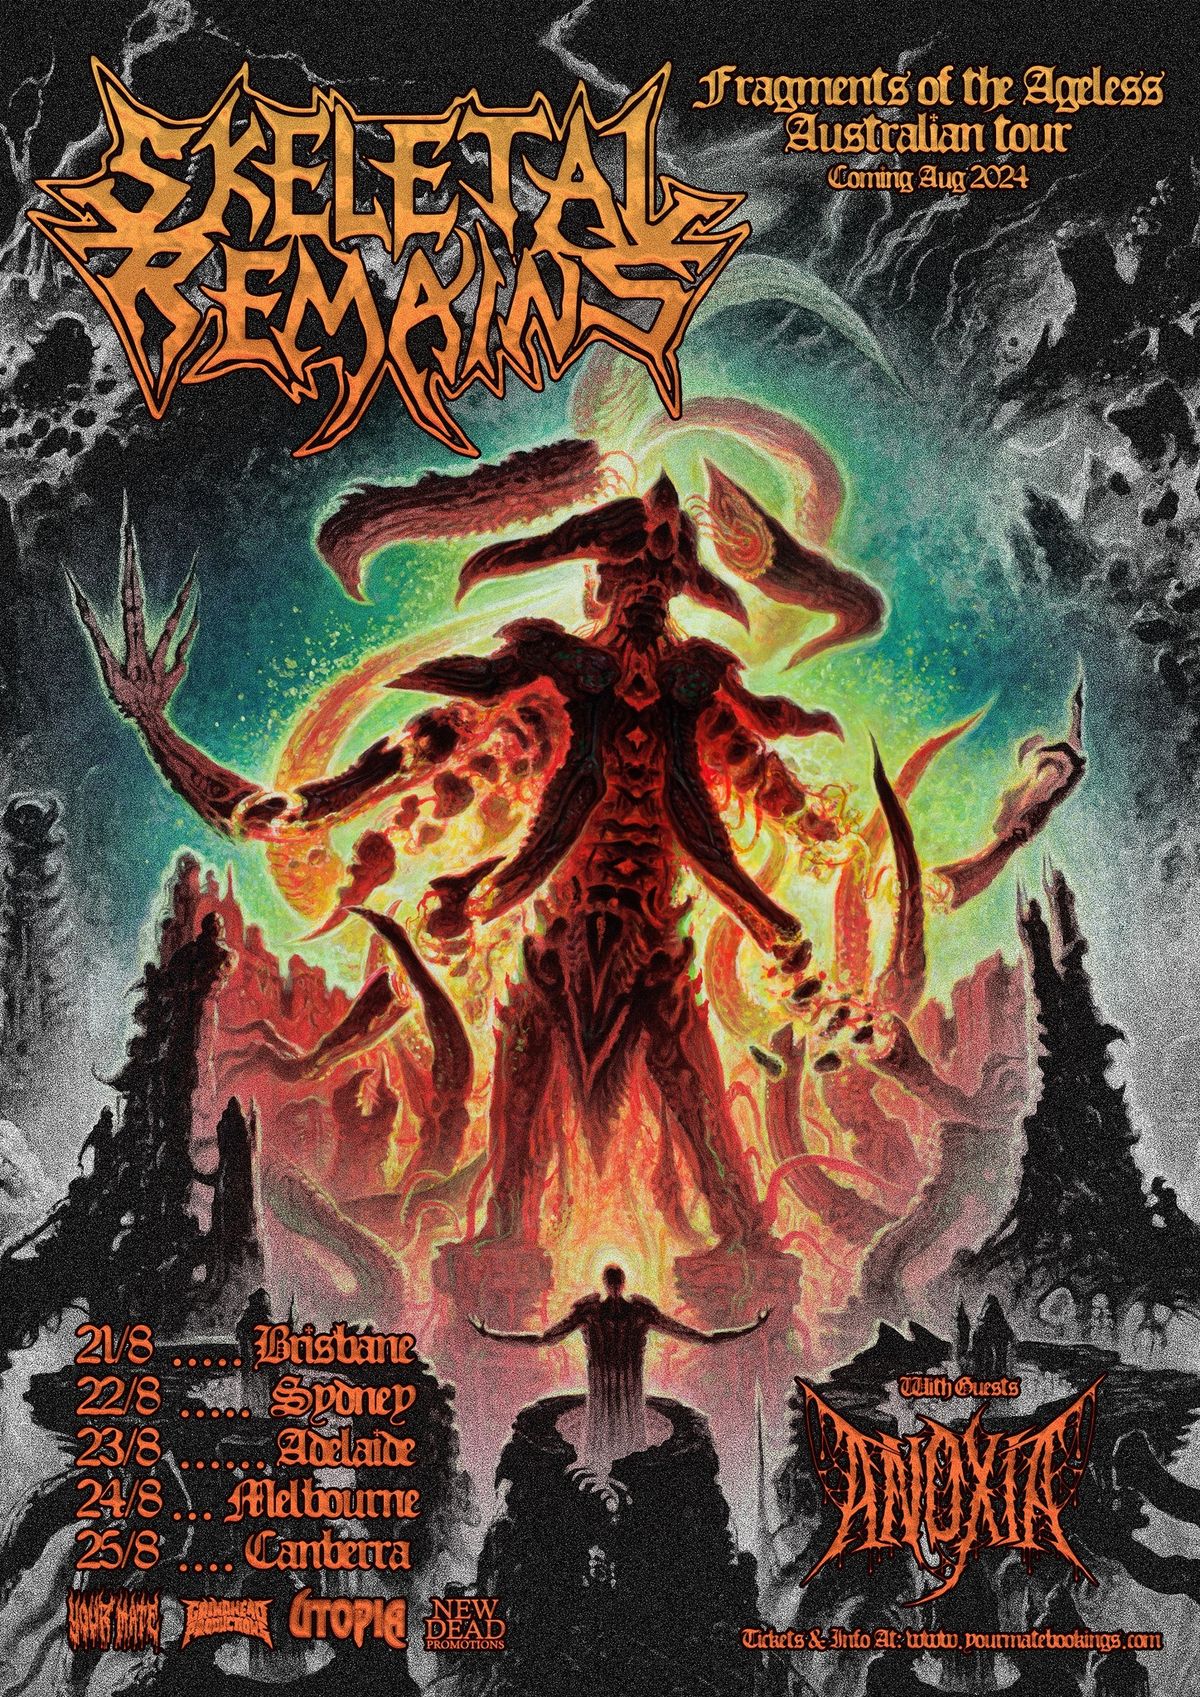 Skeletal Remains (USA) Brisbane with Anoxia & Guests